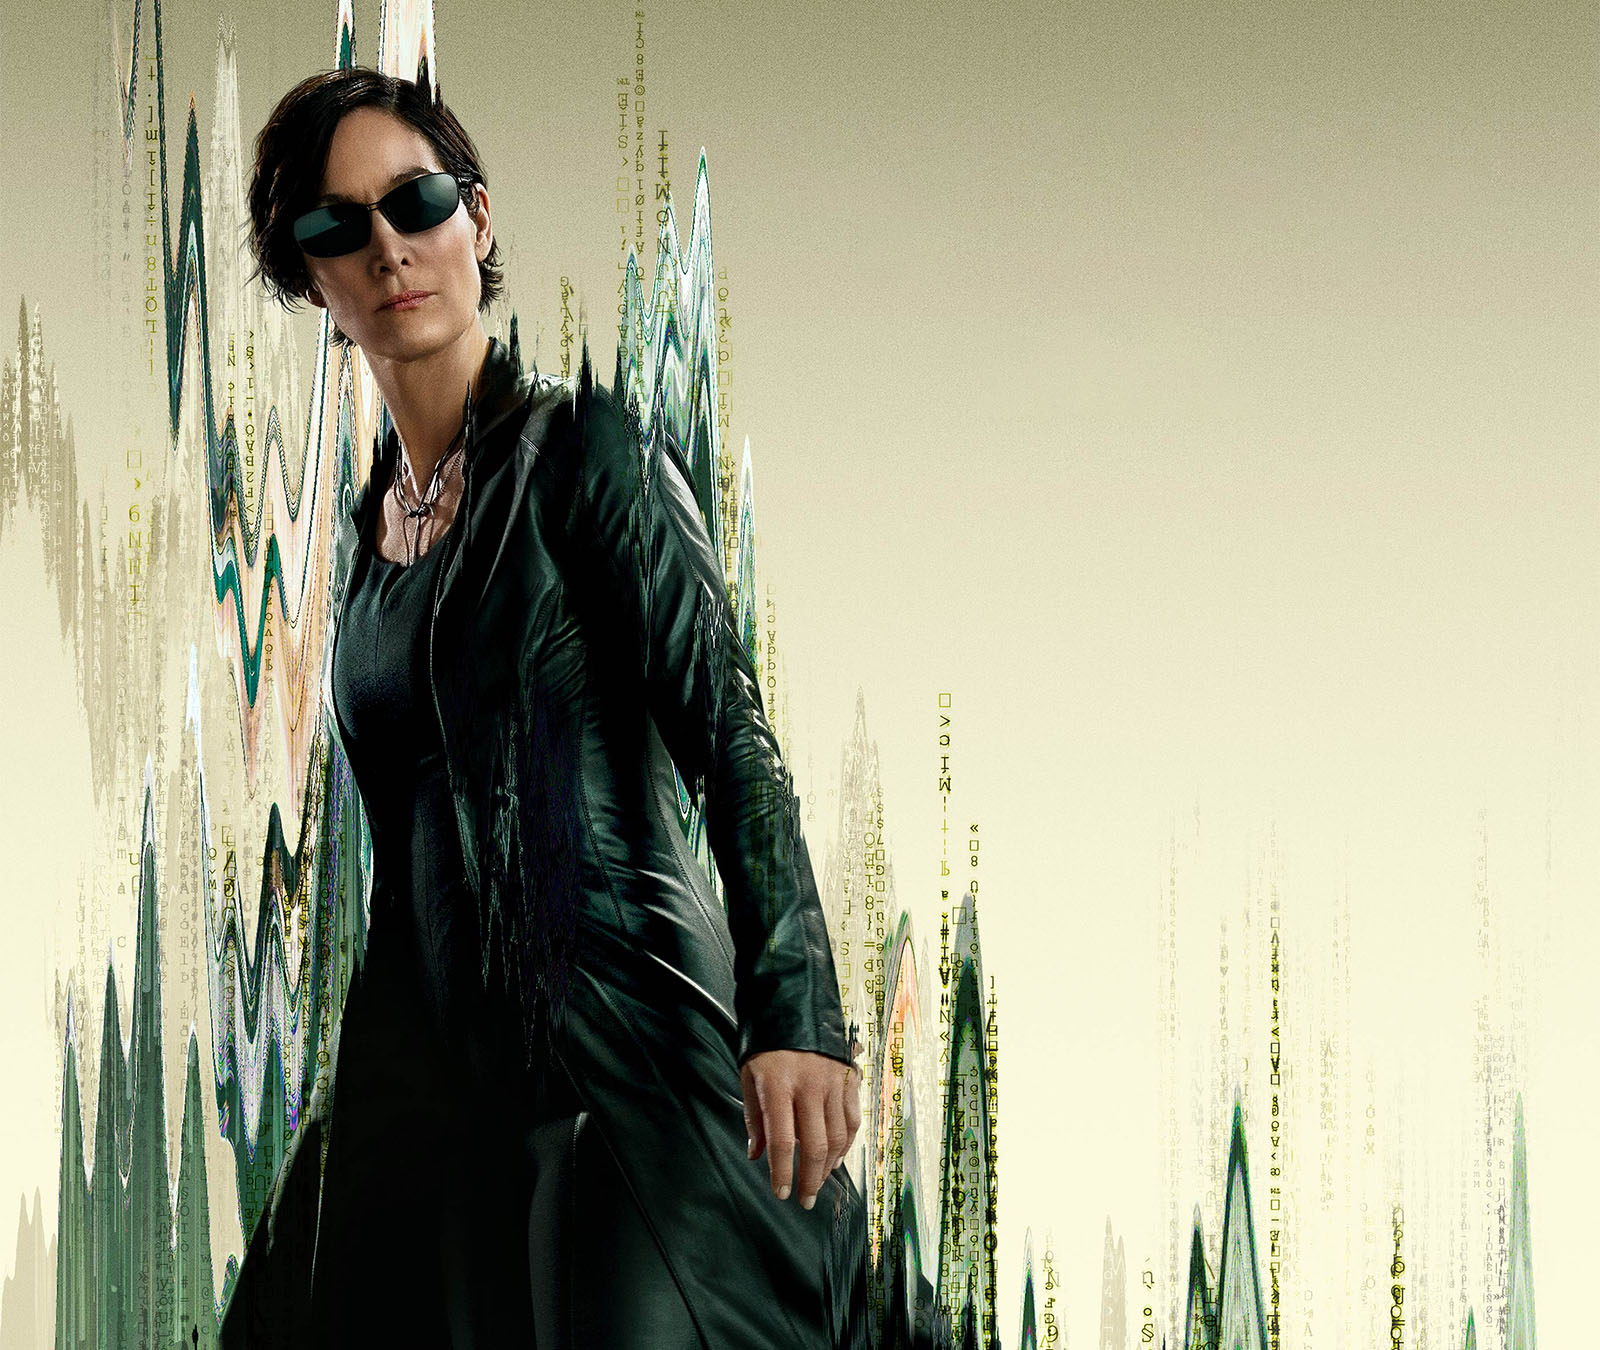 Carrie Ann Moss reprises the role of Trinity in The Matrix Resurrections. Image © Warner Bros Pictures